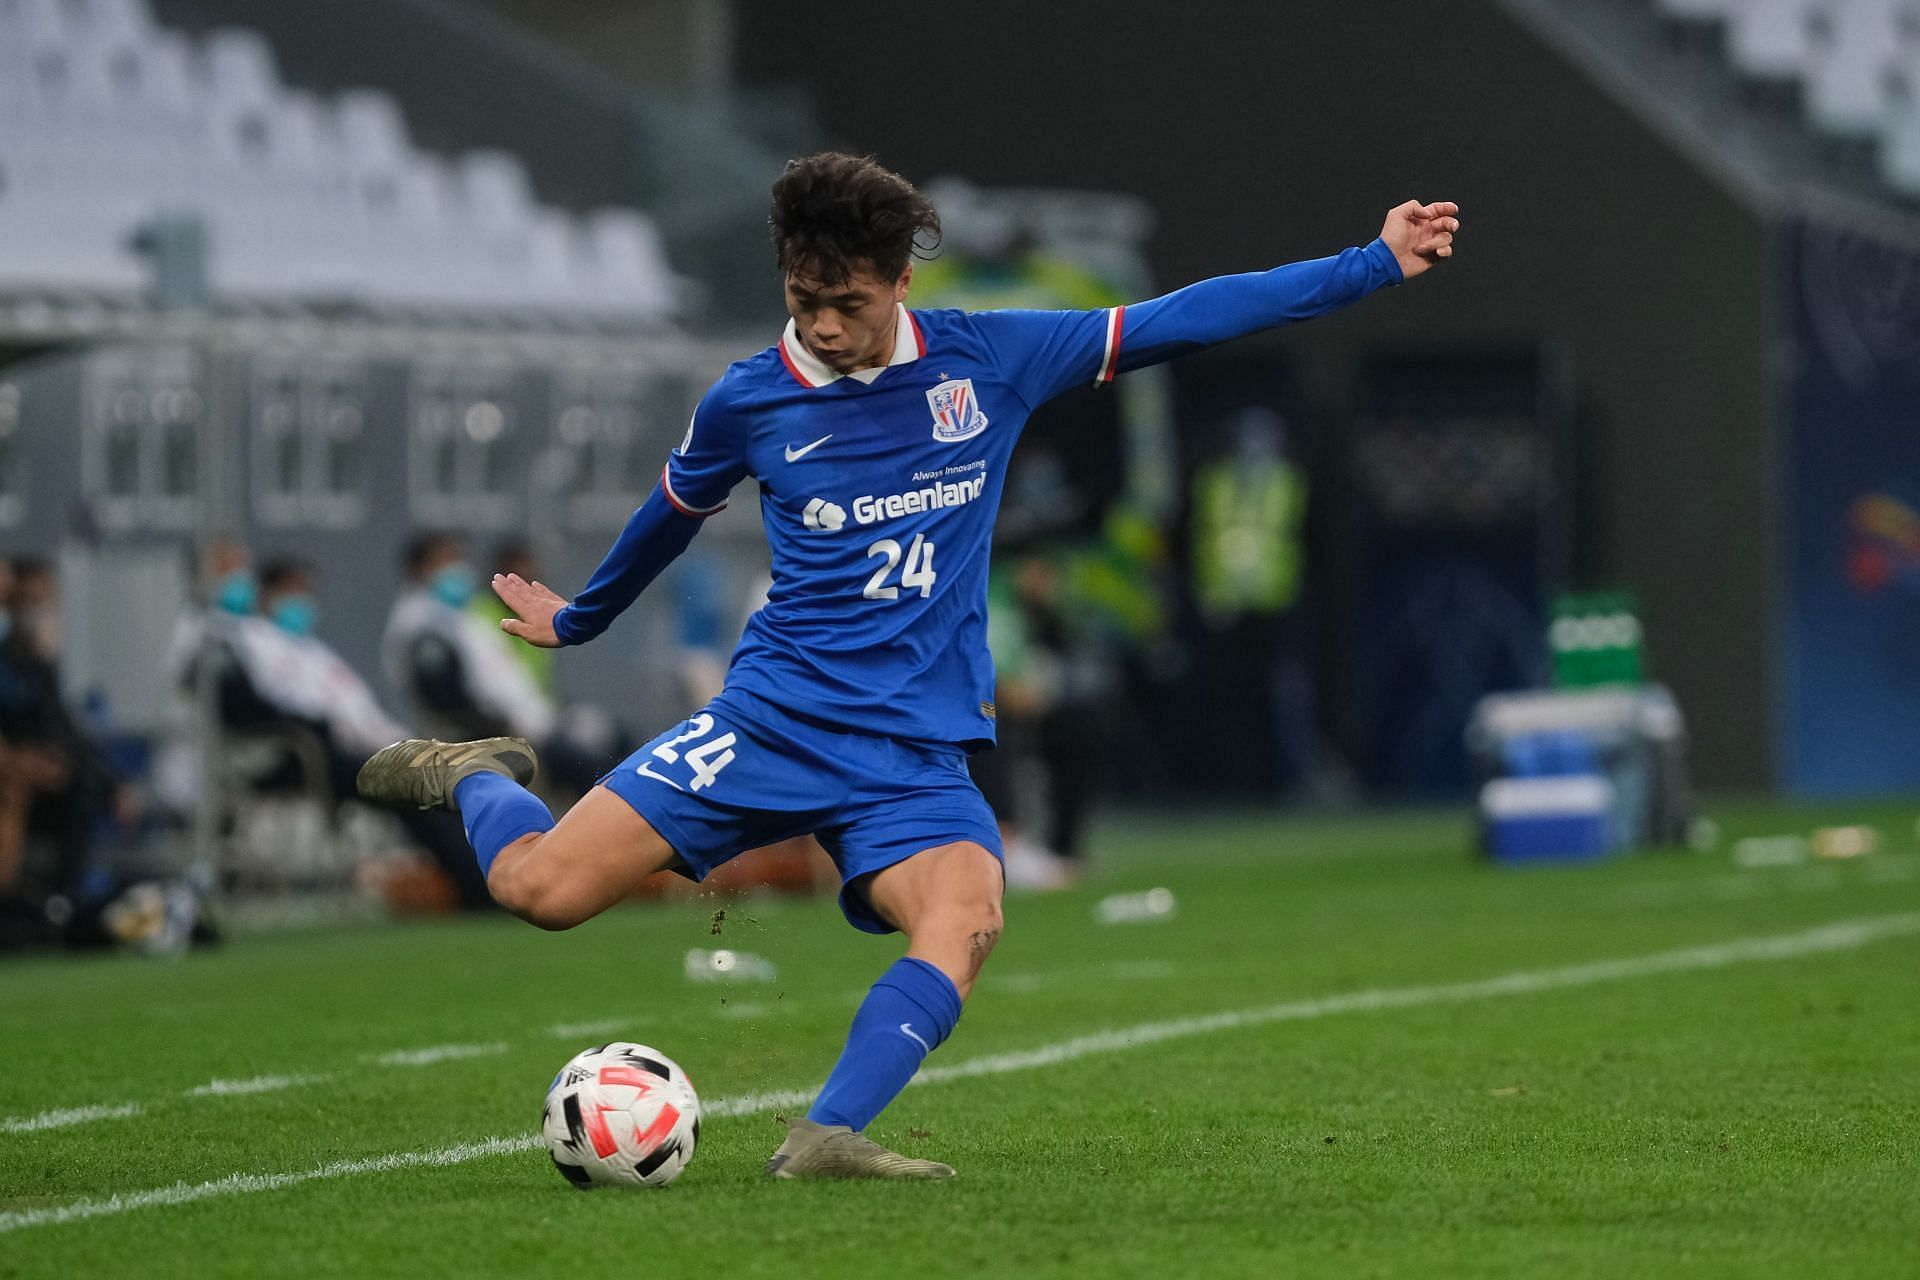 Shanghai Shenhua face Hebei in their upcoming Chinese Super League fixture on Thursday